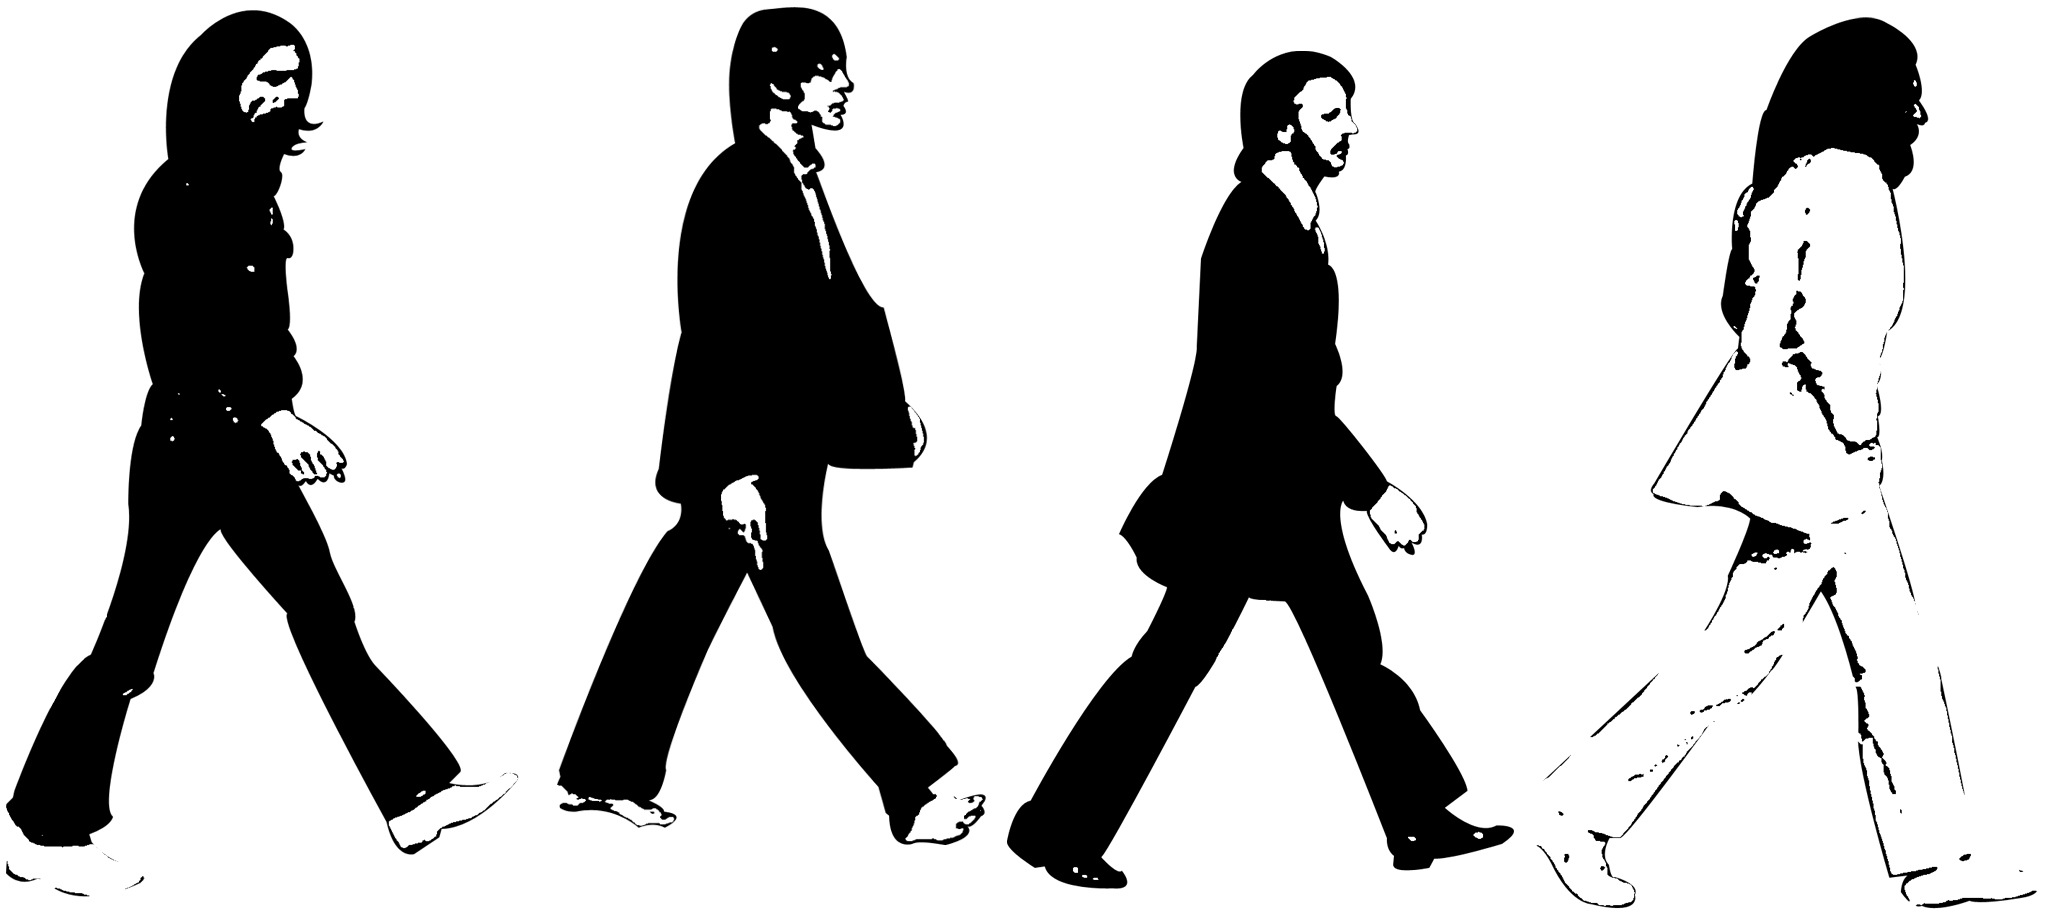 the beatles abbey road silhouette